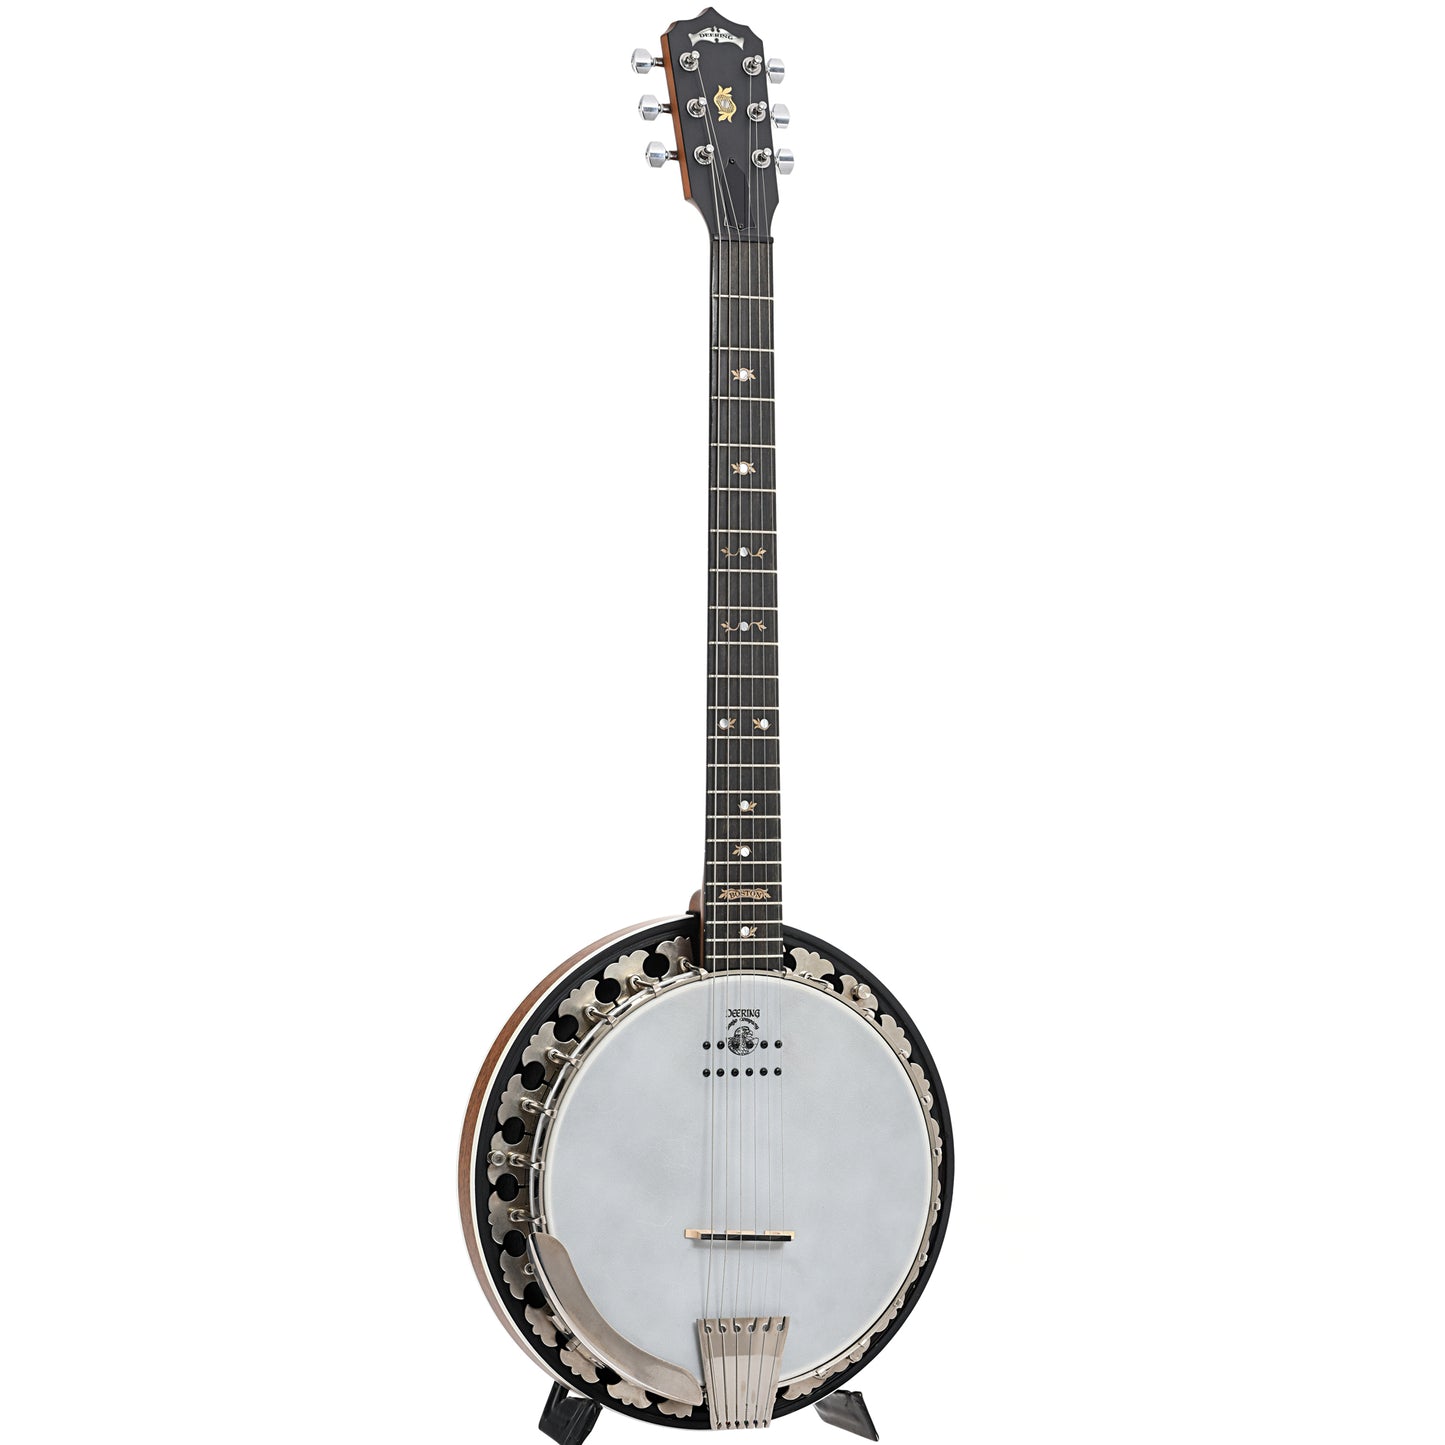 Full front and side of Deering Boston 6 A/E Banjo-Guitar (2012)